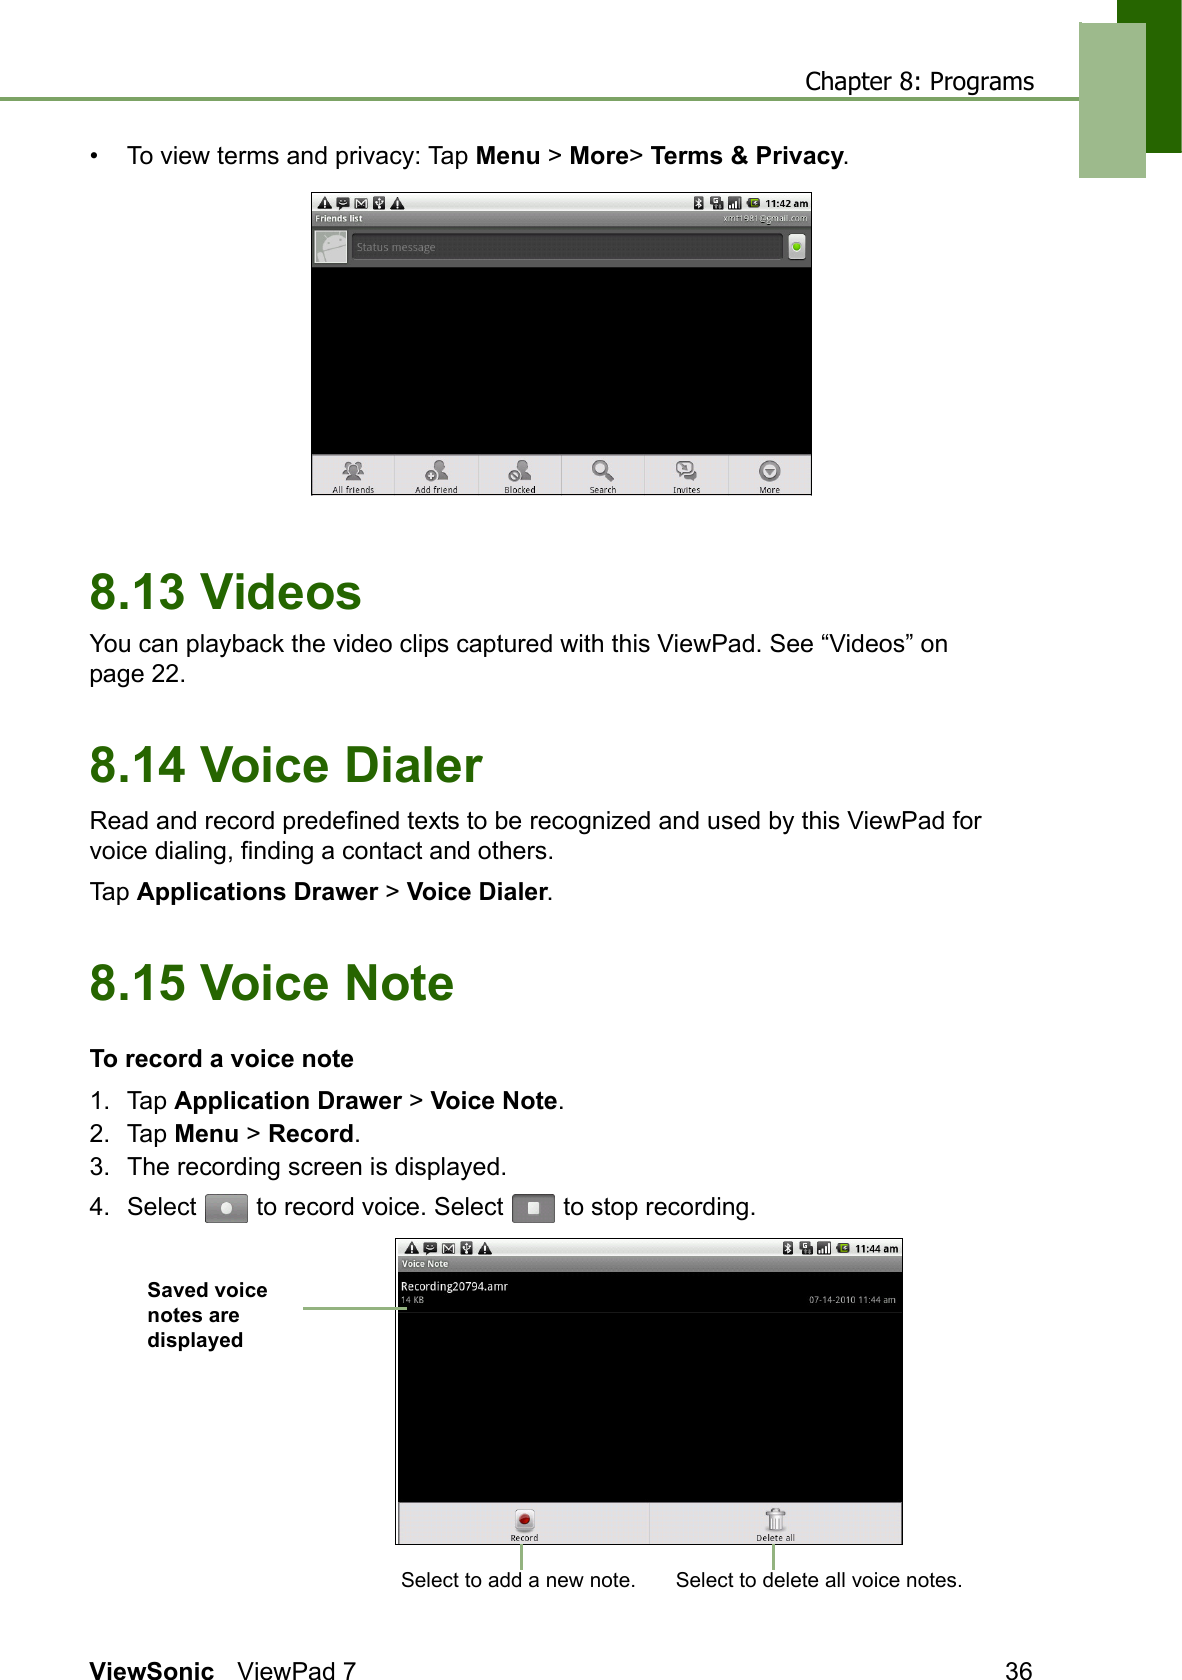 Chapter 8: ProgramsViewSonic ViewPad 7 36• To view terms and privacy: Tap Menu &gt; More&gt; Terms &amp; Privacy. 8.13 VideosYou can playback the video clips captured with this ViewPad. See “Videos” on page 22.8.14 Voice DialerRead and record predefined texts to be recognized and used by this ViewPad for voice dialing, finding a contact and others.Tap Applications Drawer &gt; Voice Dialer.8.15 Voice NoteTo record a voice note1. Tap Application Drawer &gt; Voice Note.2. Tap Menu &gt; Record. 3. The recording screen is displayed.4. Select   to record voice. Select   to stop recording.Saved voice notes are displayed Select to add a new note. Select to delete all voice notes.